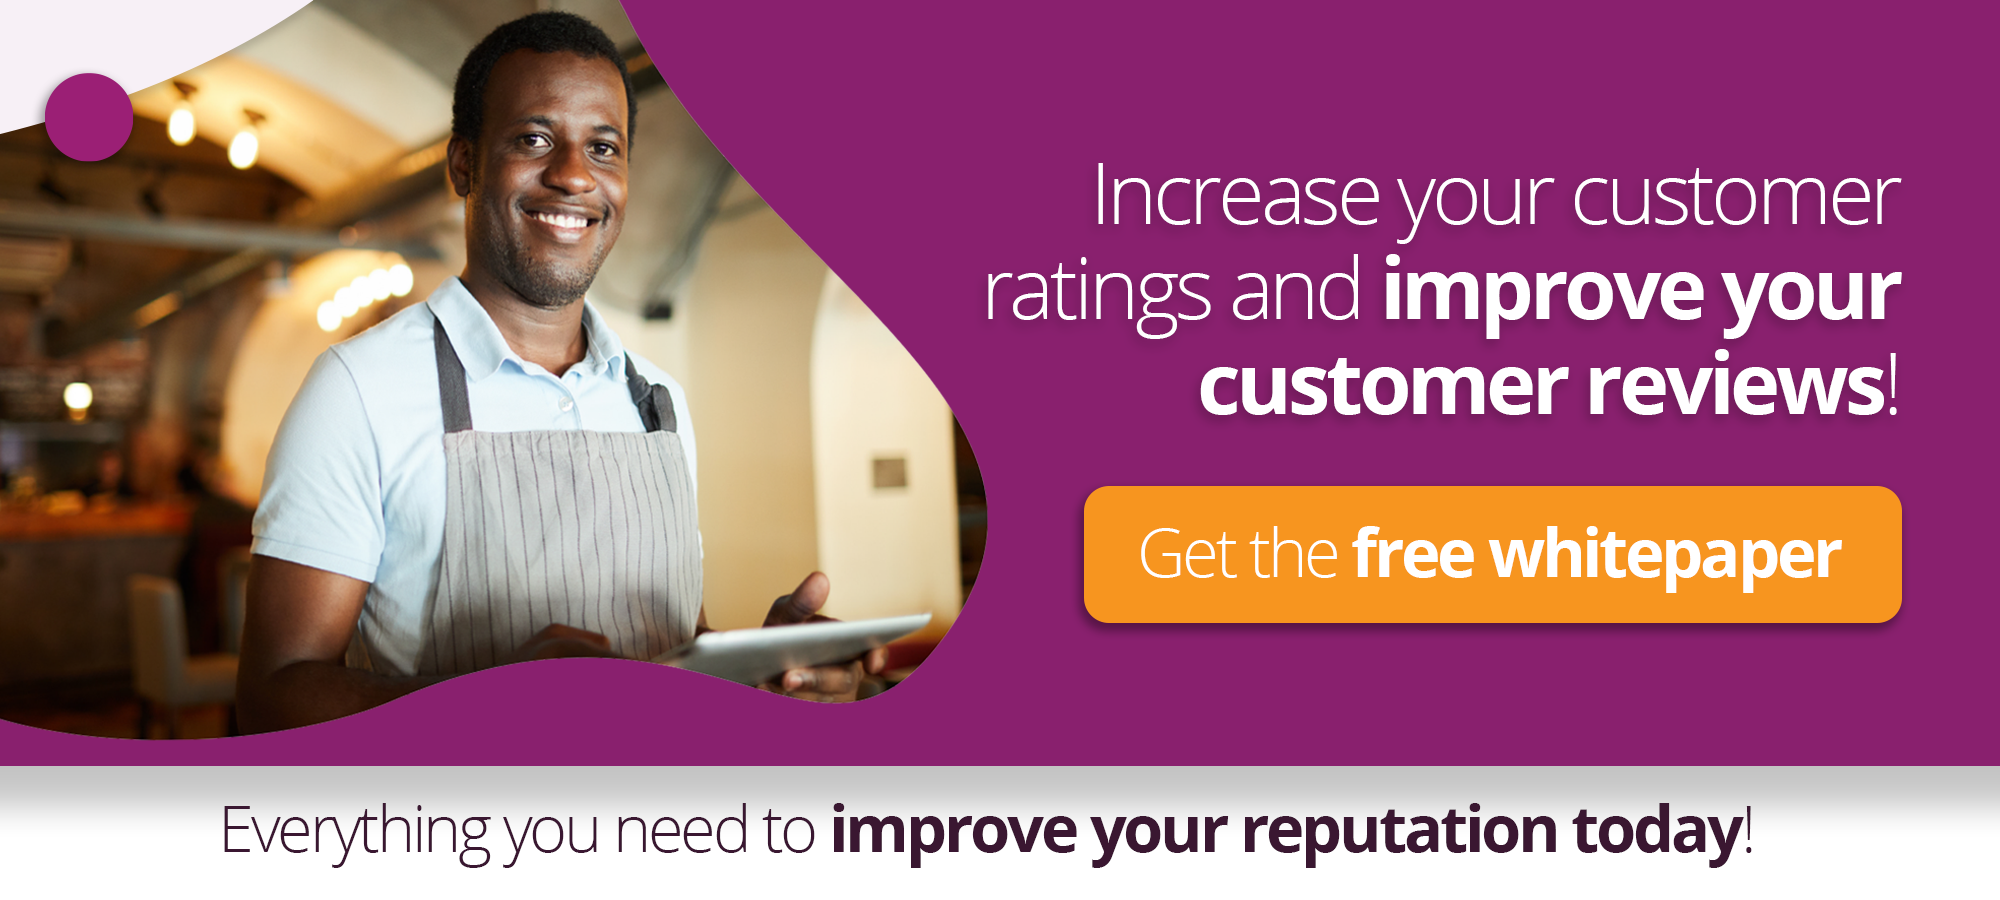 Restaurant Customer Service Recovery Can Improve Reputation